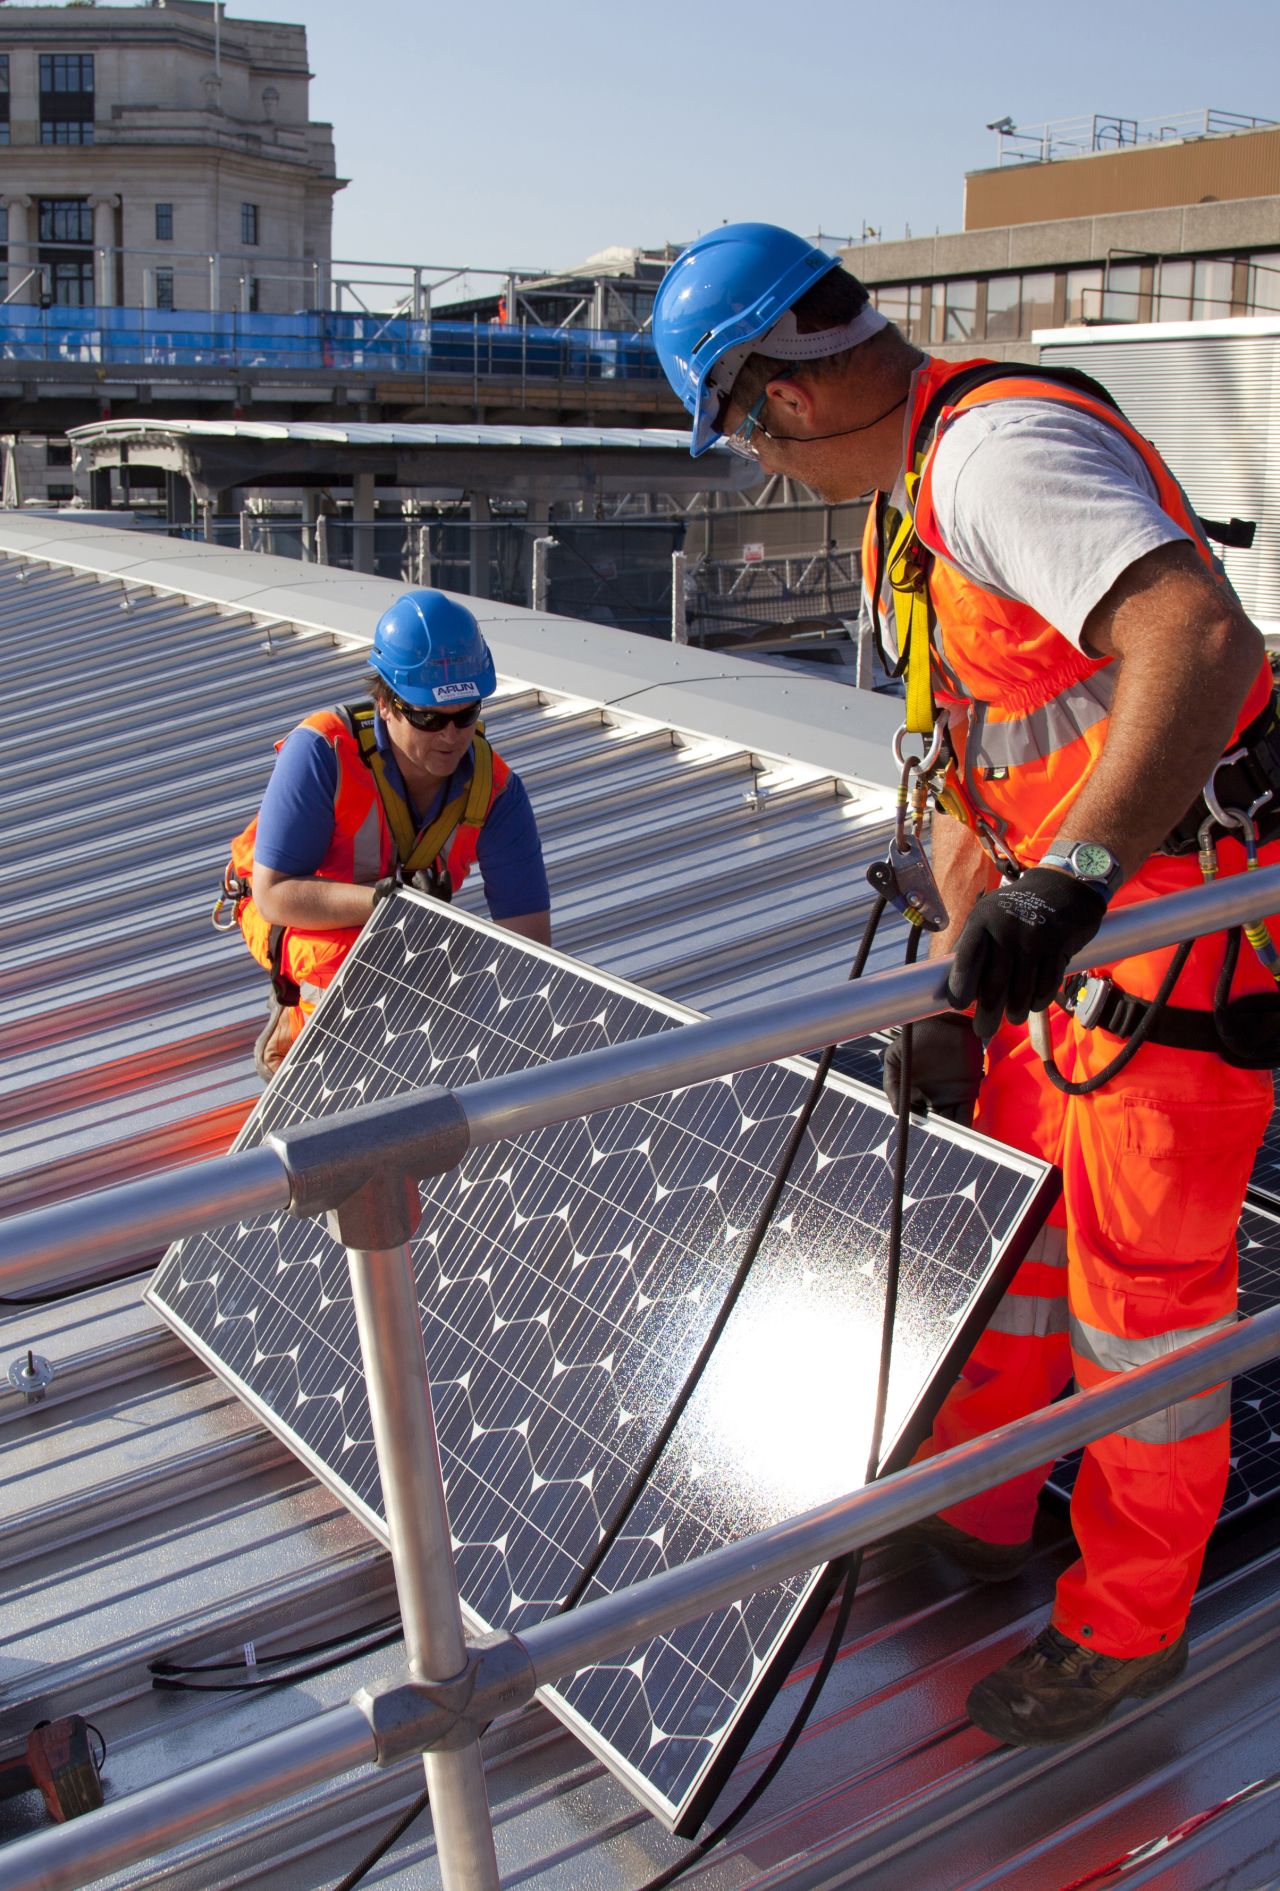 Over 4,400 photovoltaic panels are installed on the roof, providing 50 percent of the energy needs for the London Blackfriars railway station located on the bridge.